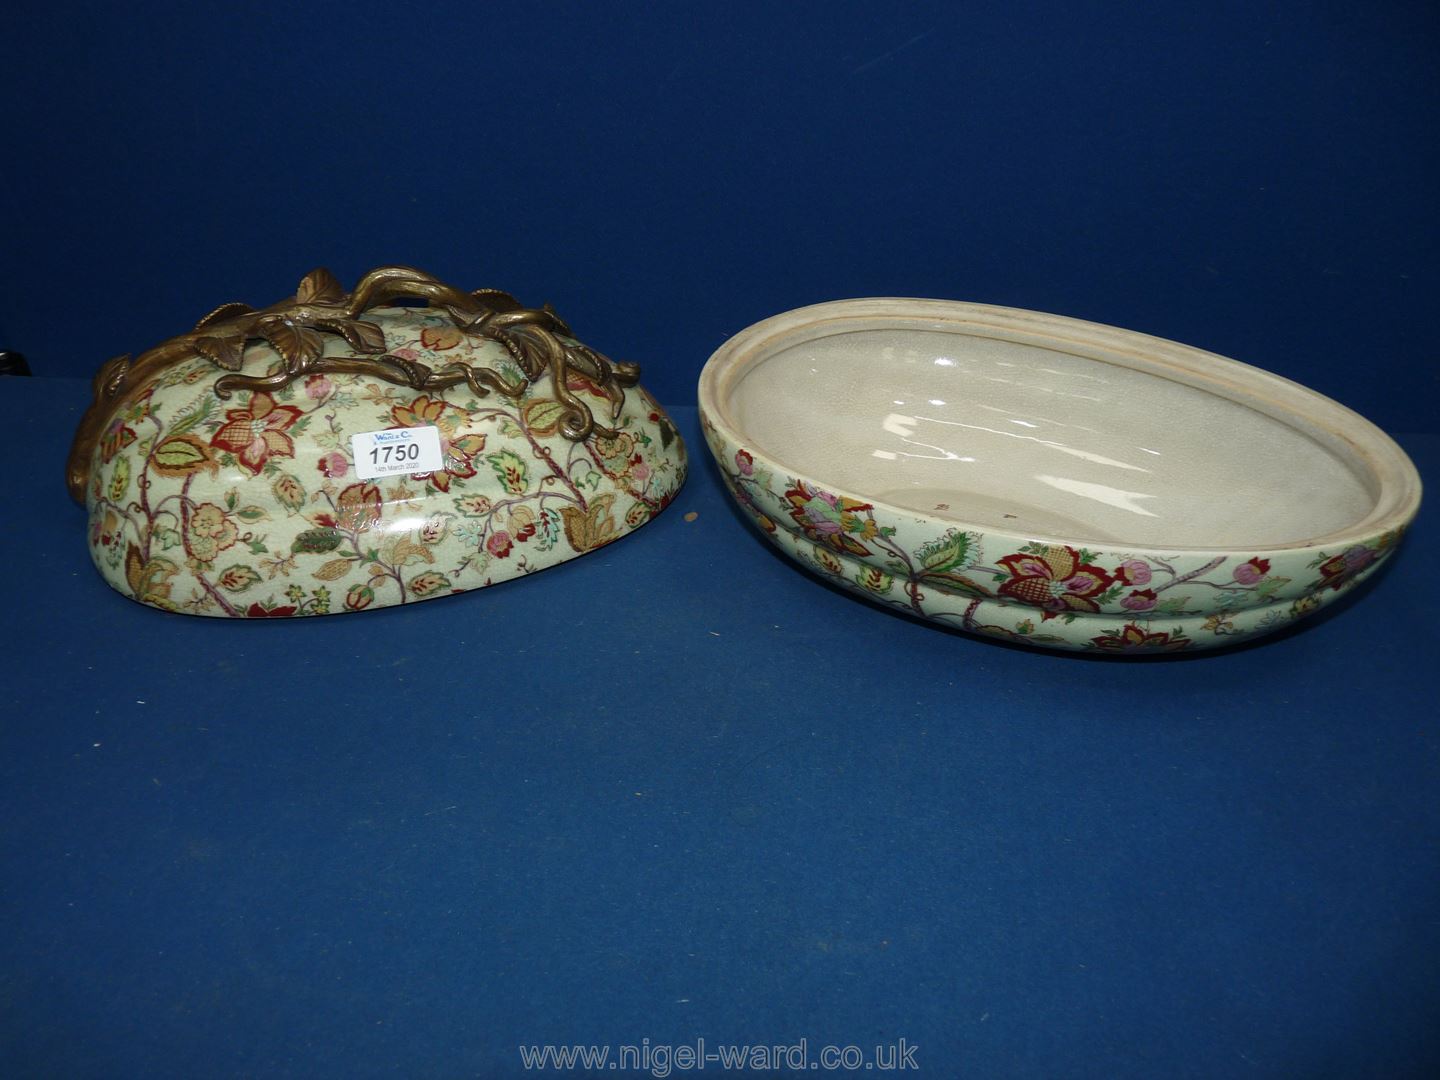 A large ornate hand painted floral egg shaped tureen with metal fret-work to handle. - Image 2 of 2